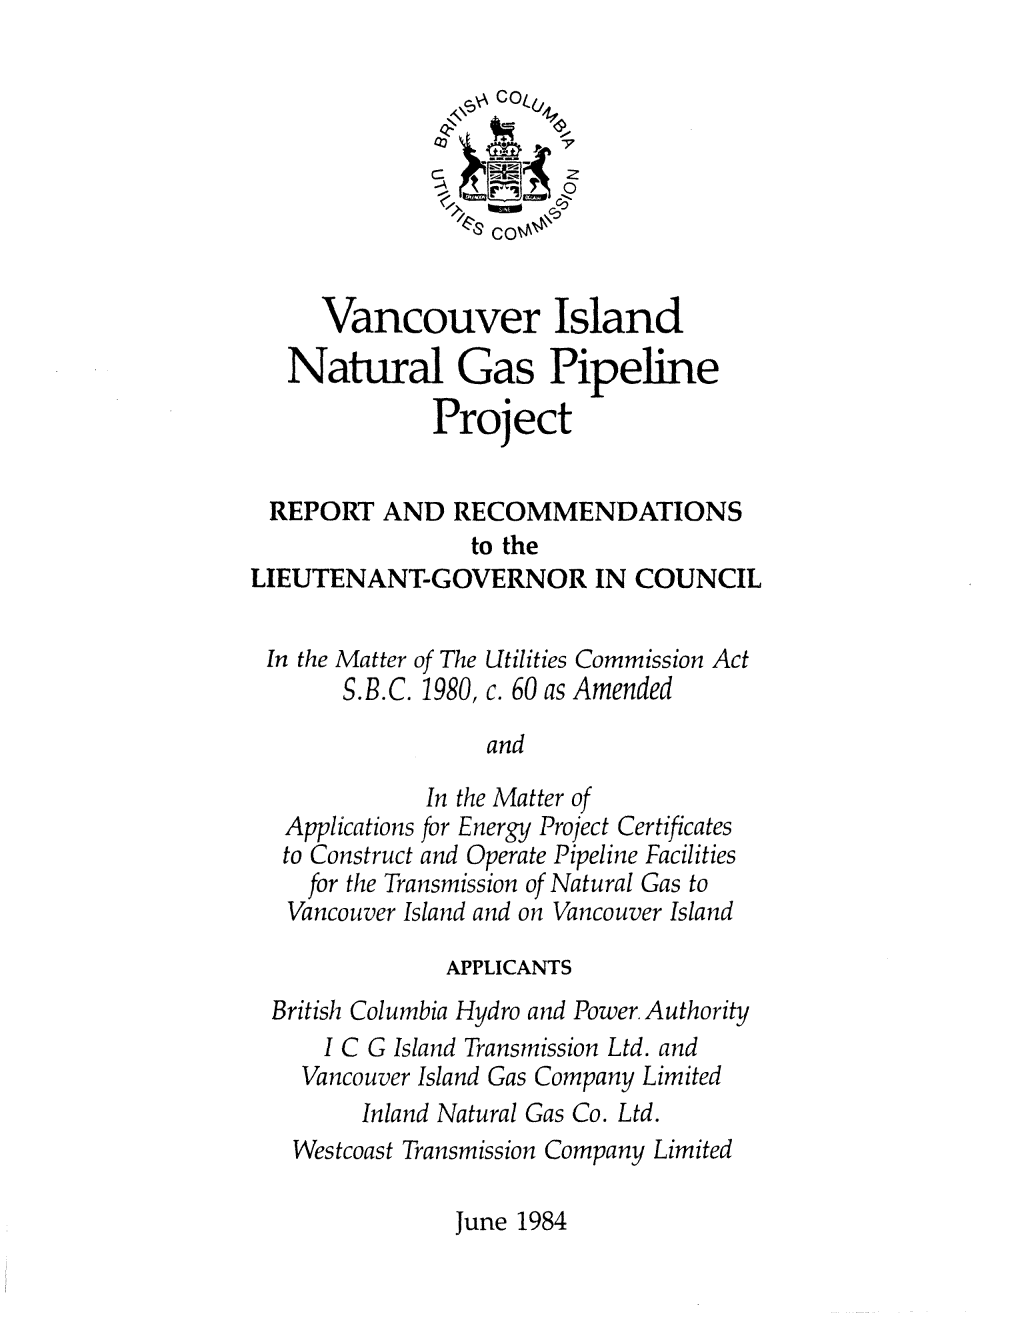 Vancouver Island Natural Gas Pipeline Project